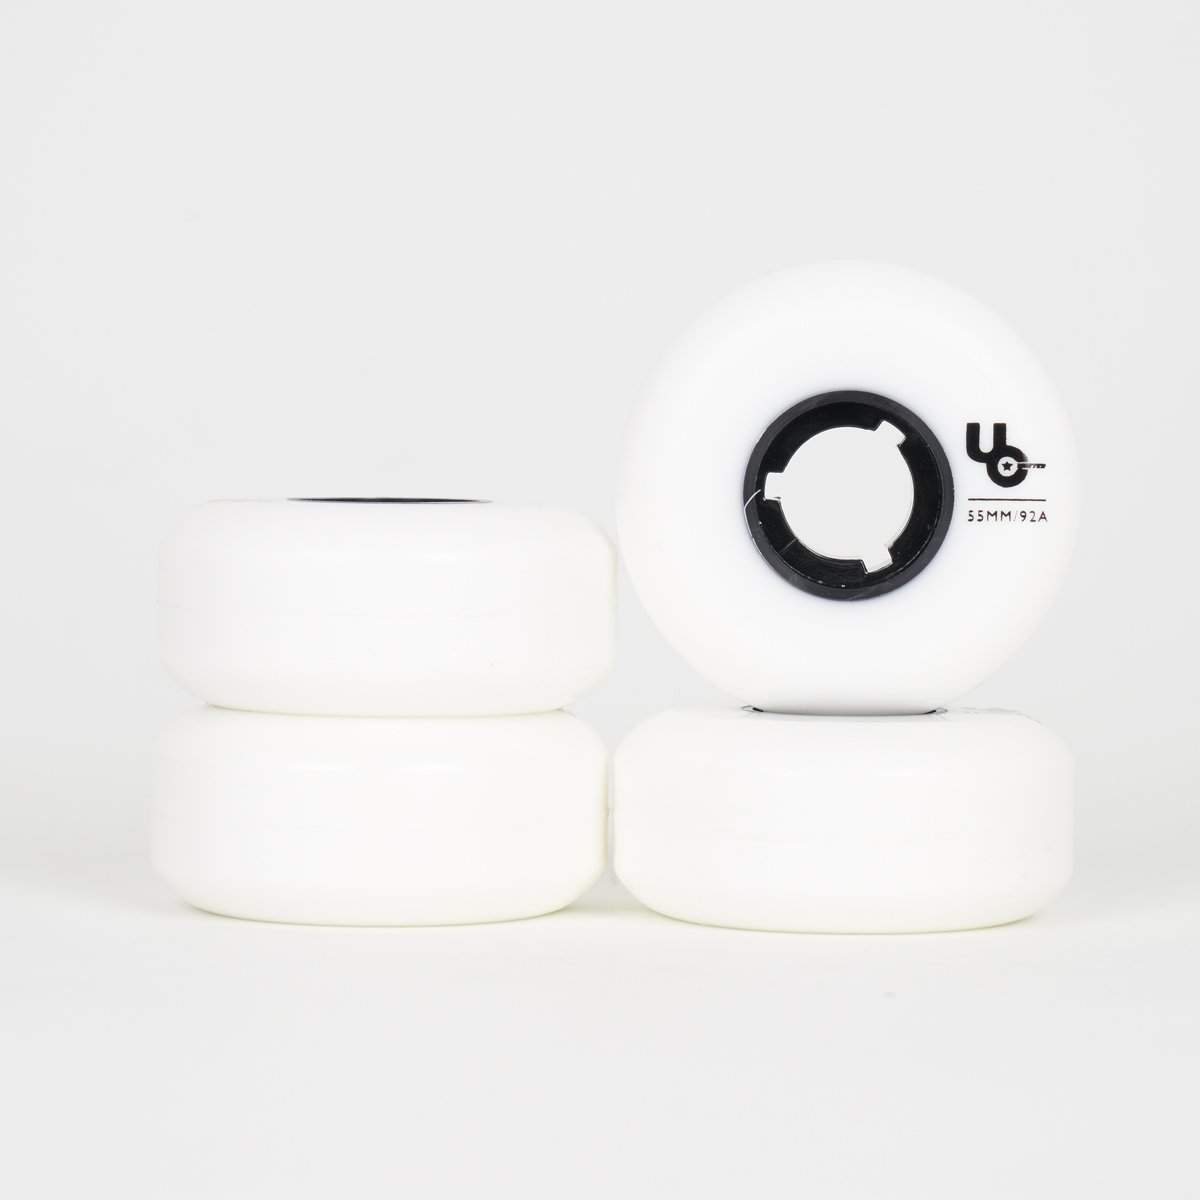 Undercover Team Wheels 55mm / 92a - White